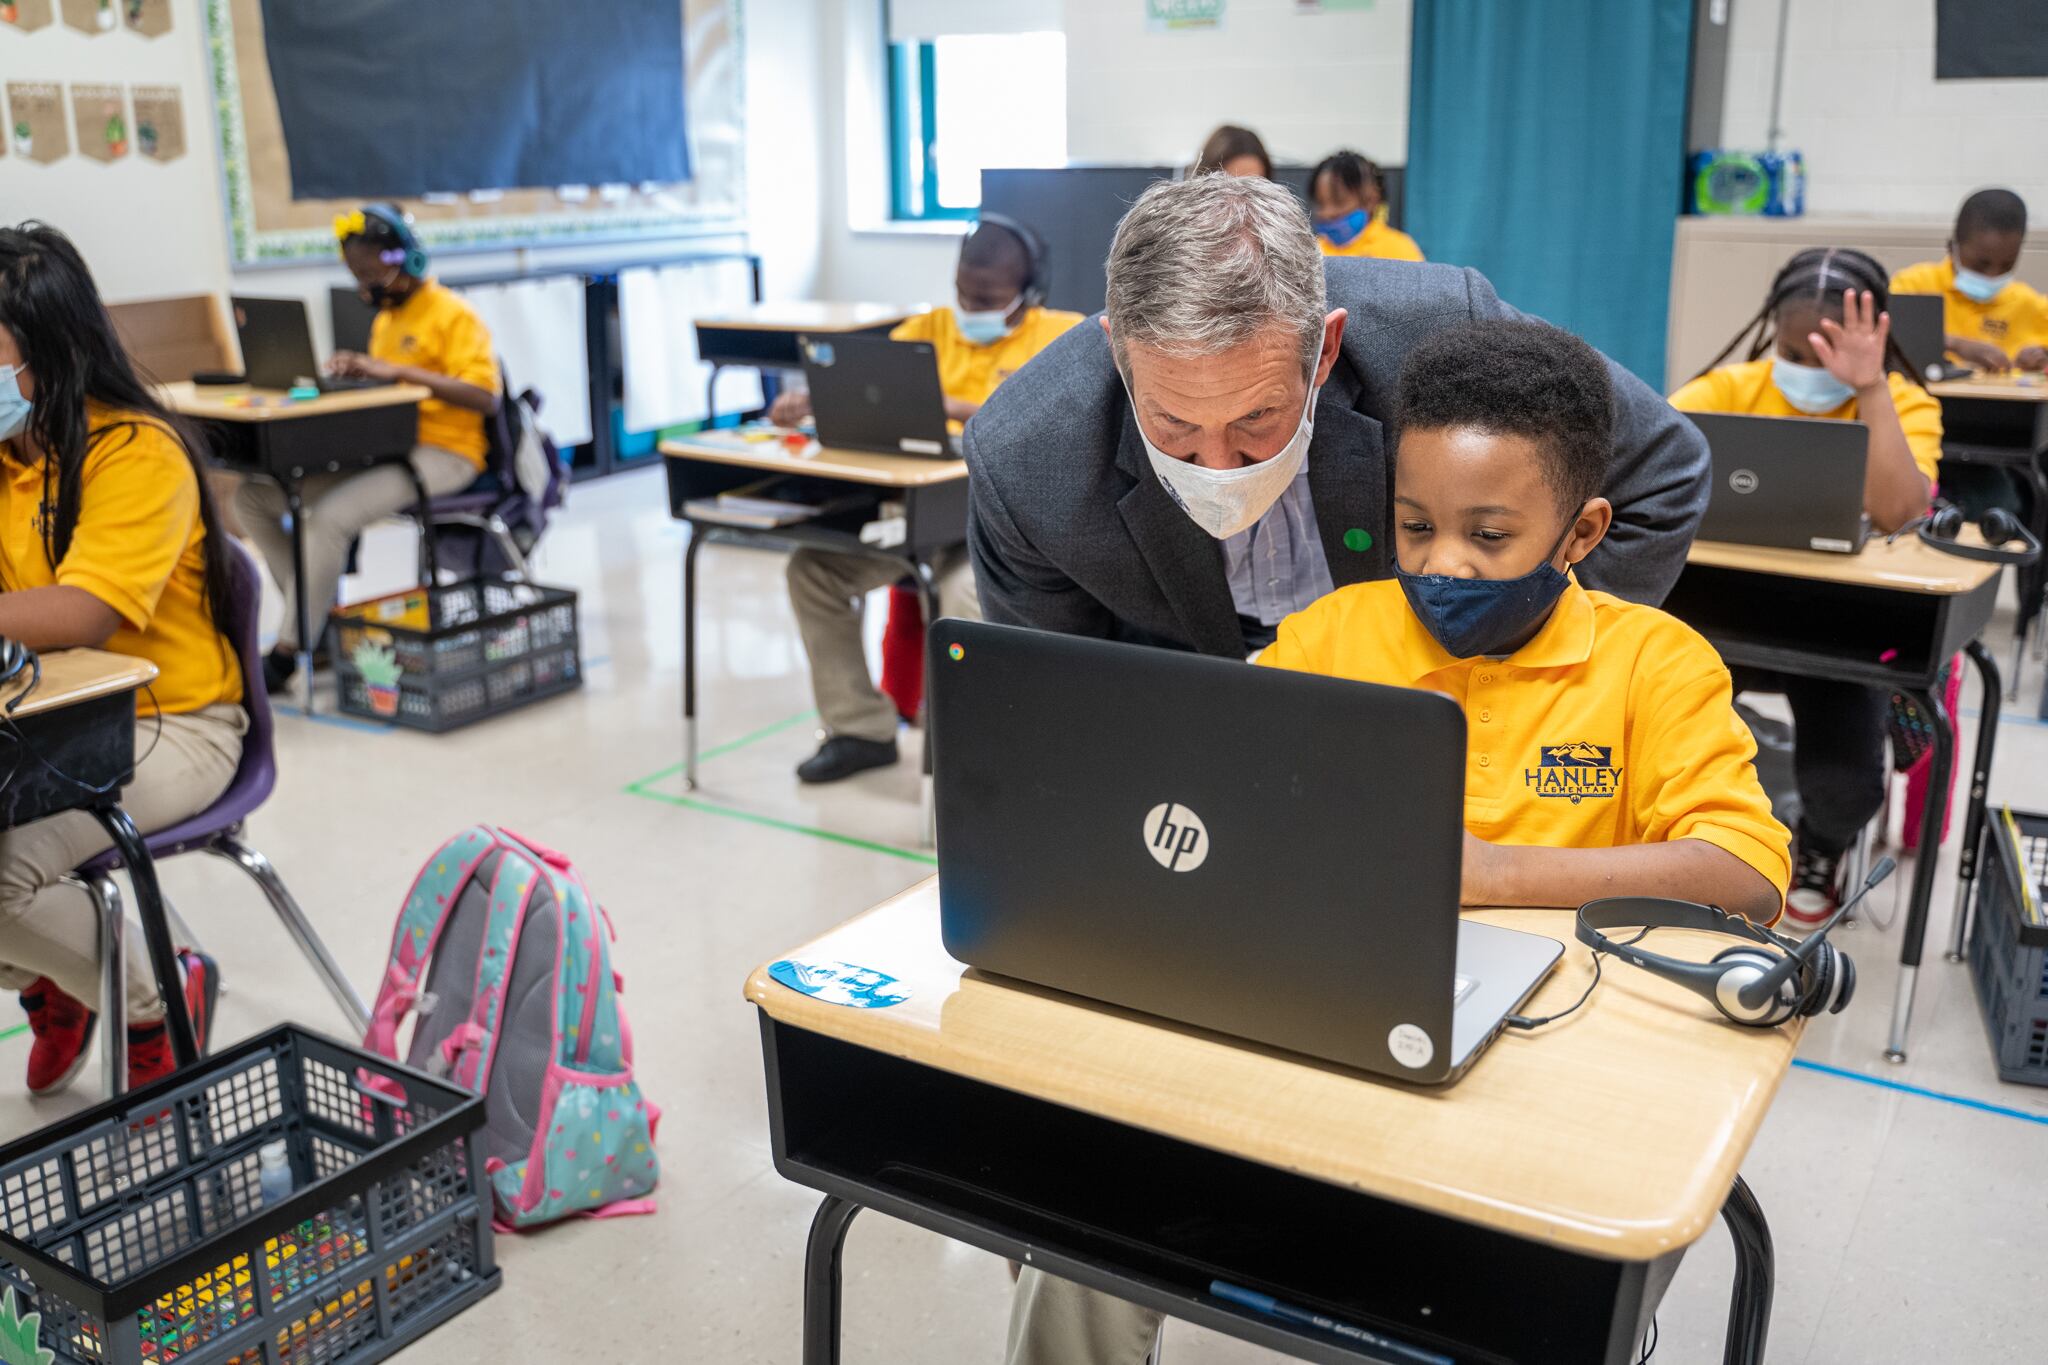 Governor Bill Lee, wearing a mask, looks over a student’s shoulder in a classroom, all the students wearing yellow shirts with protective masks.